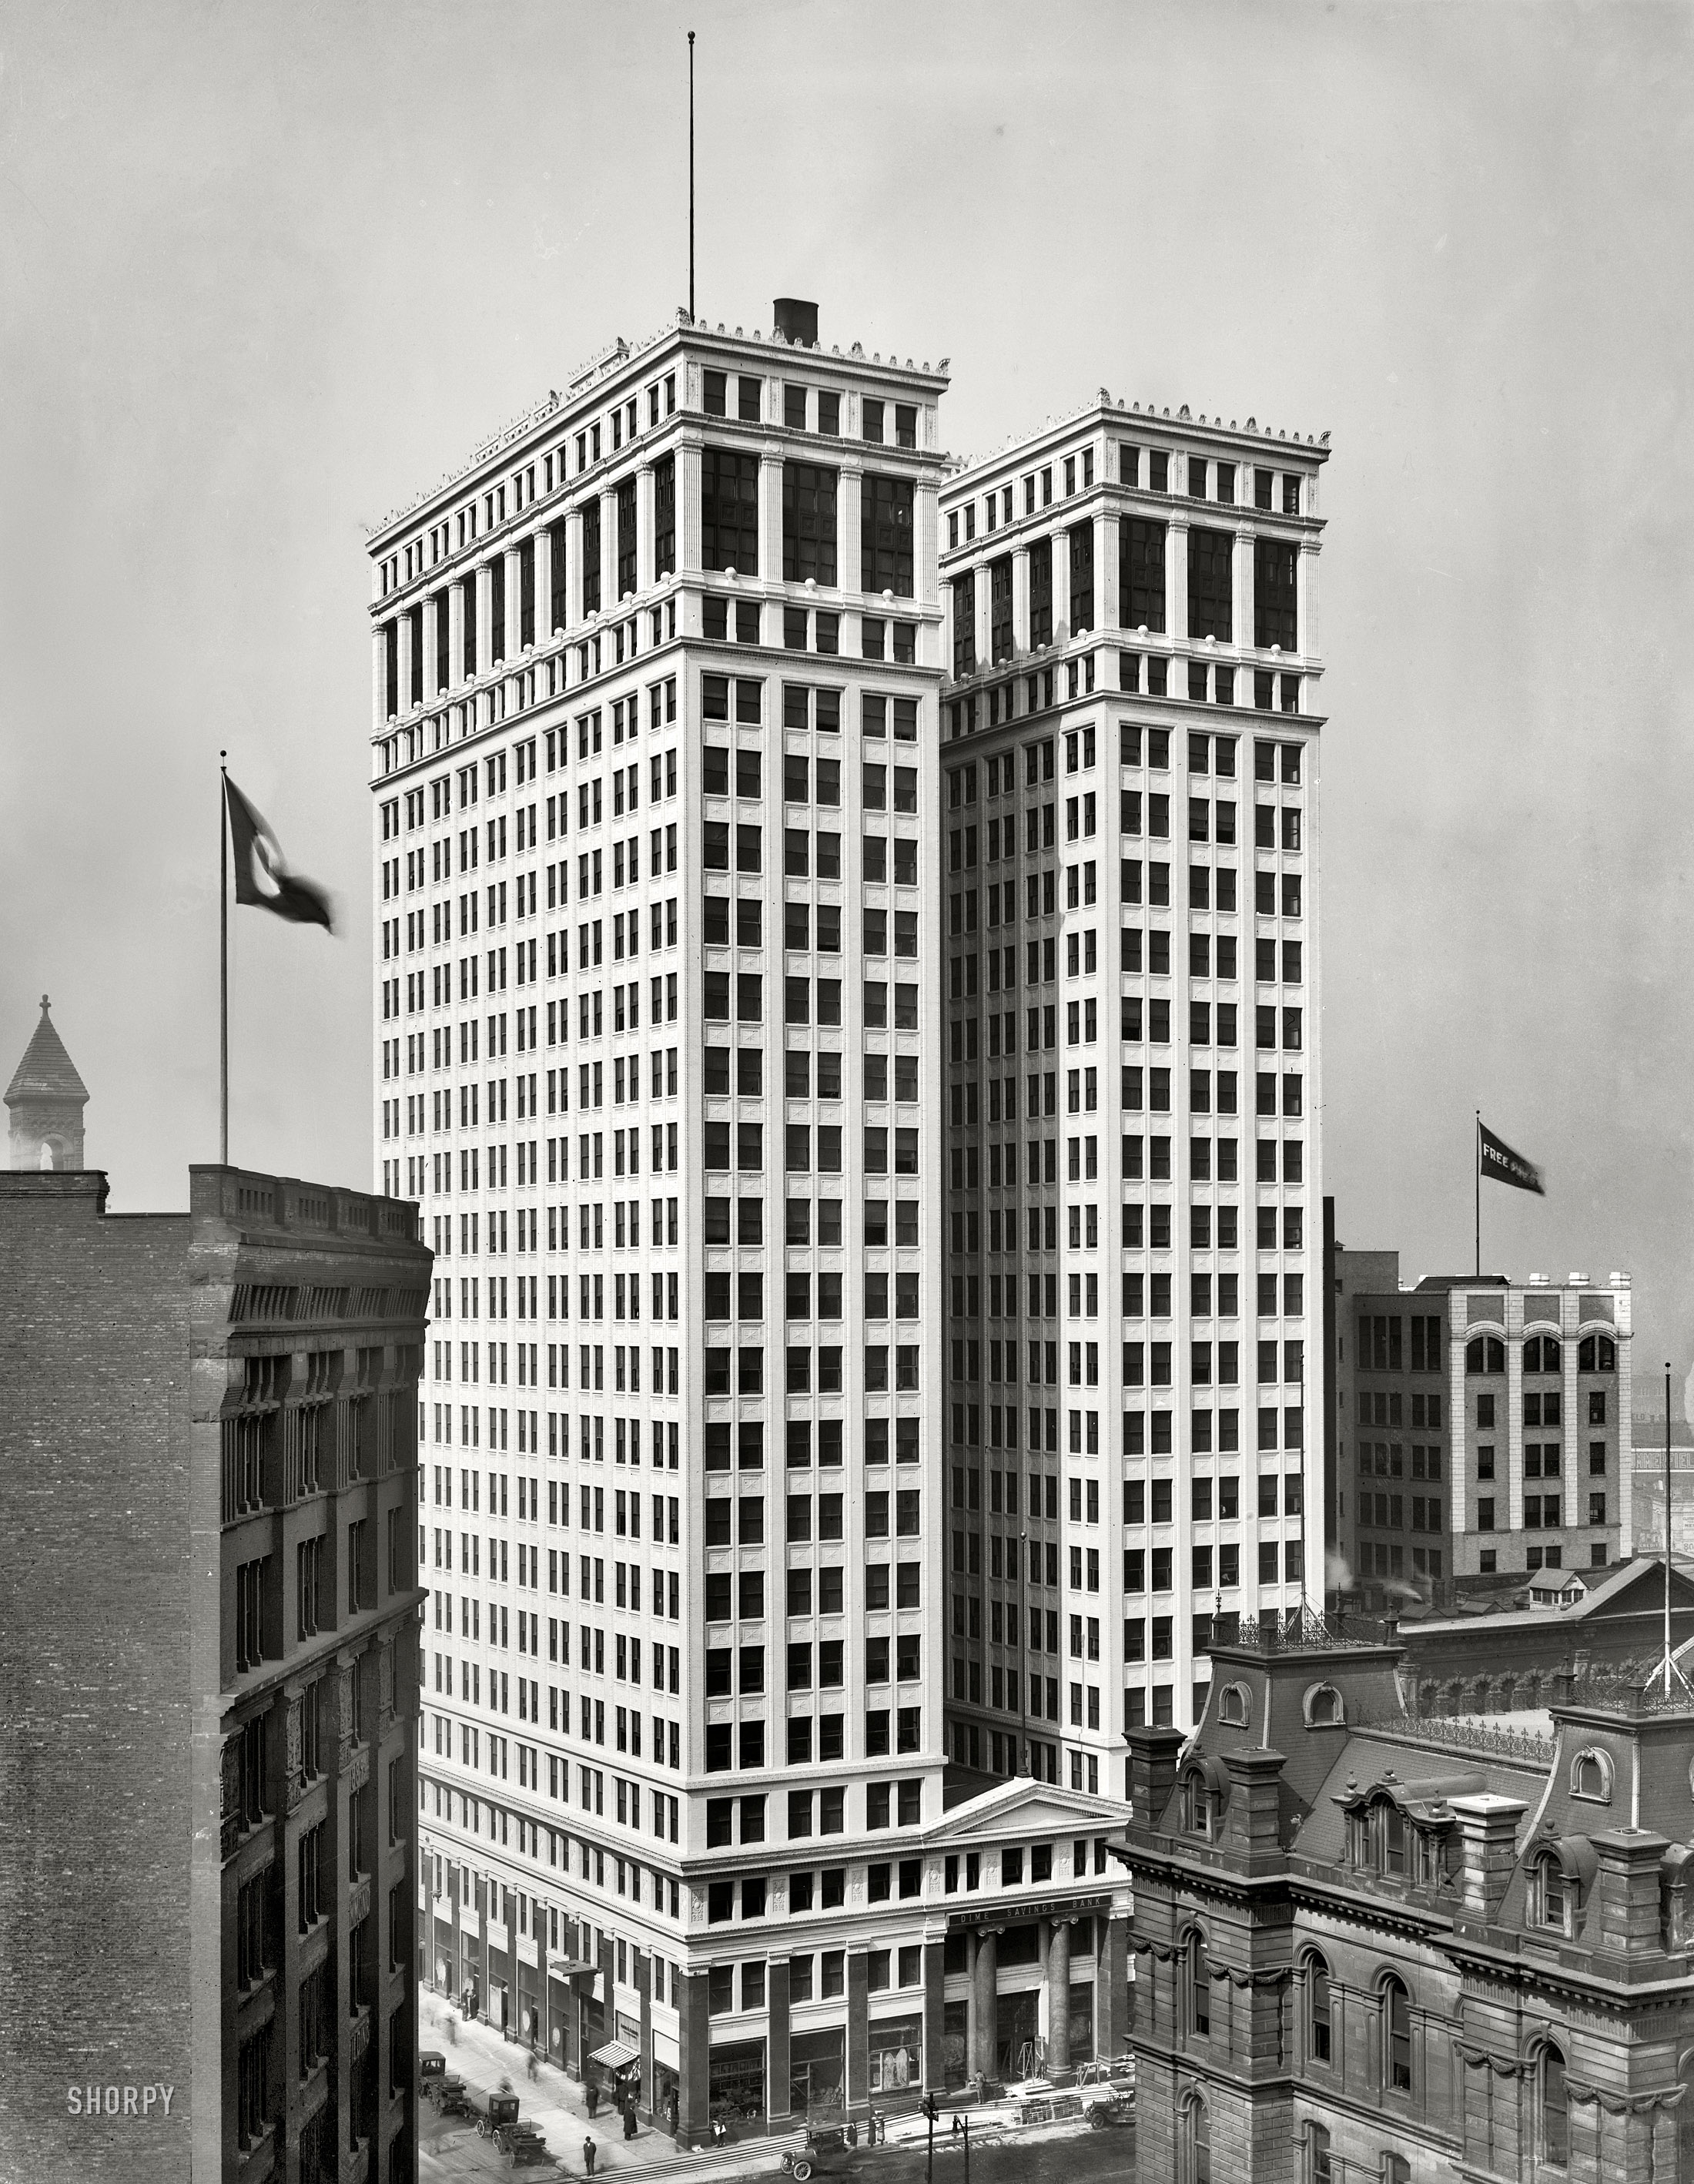 Detroit, Michigan, circa 1912. "Dime Savings Bank." The slot must be in the top. 8x10 inch glass negative, Detroit Publishing Company. View full size.